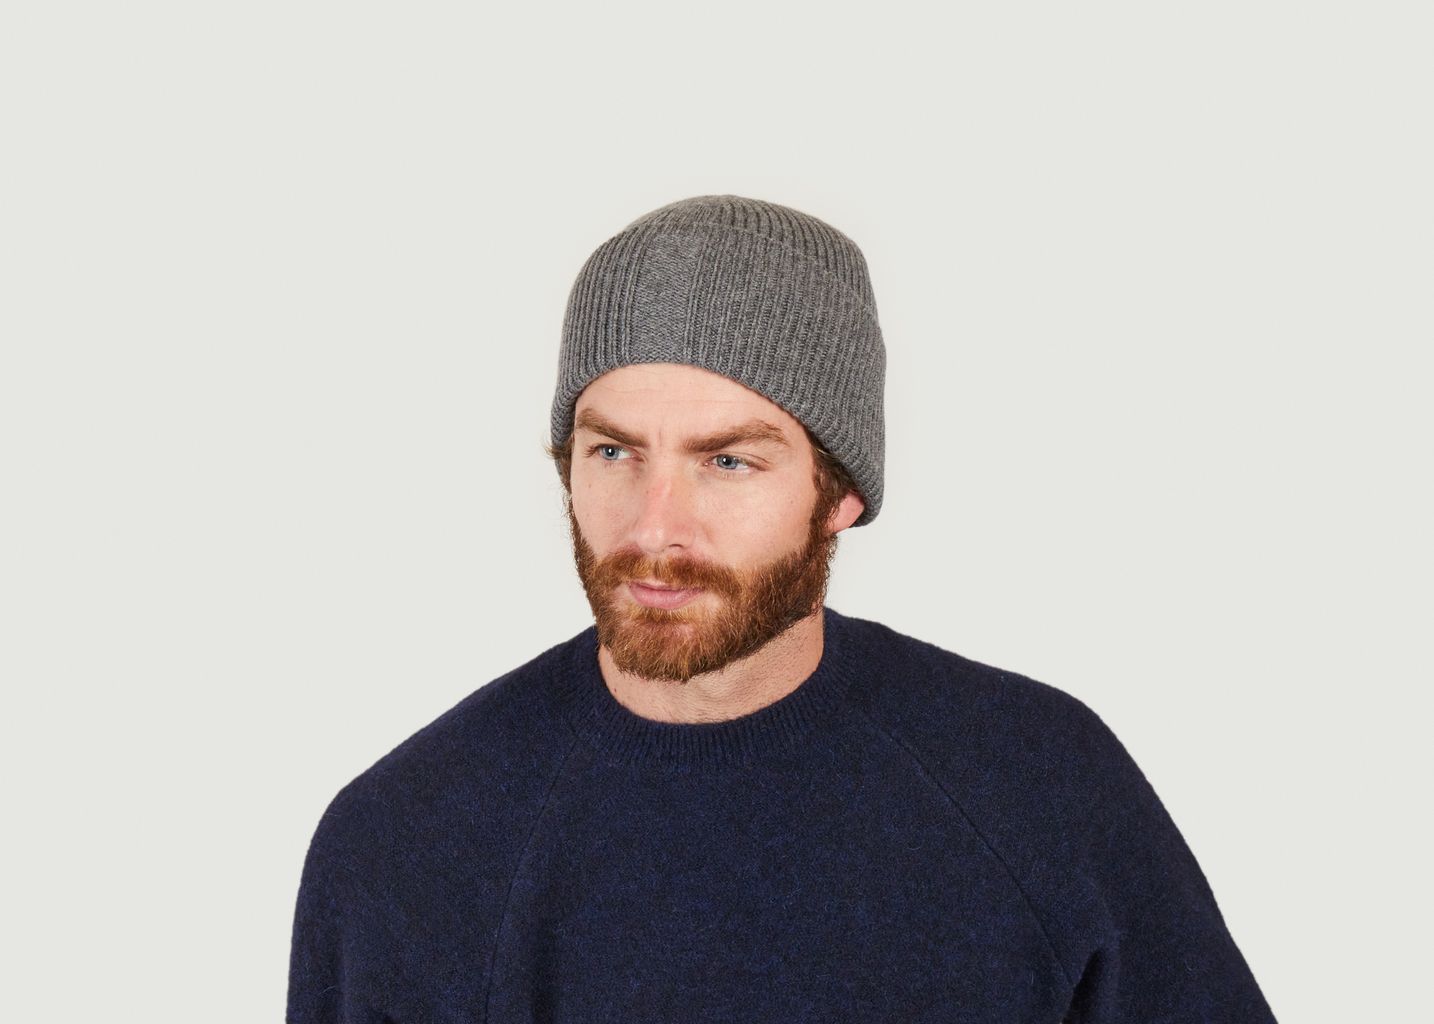  Plain beanie in cashmere and recycled wool - Douillet